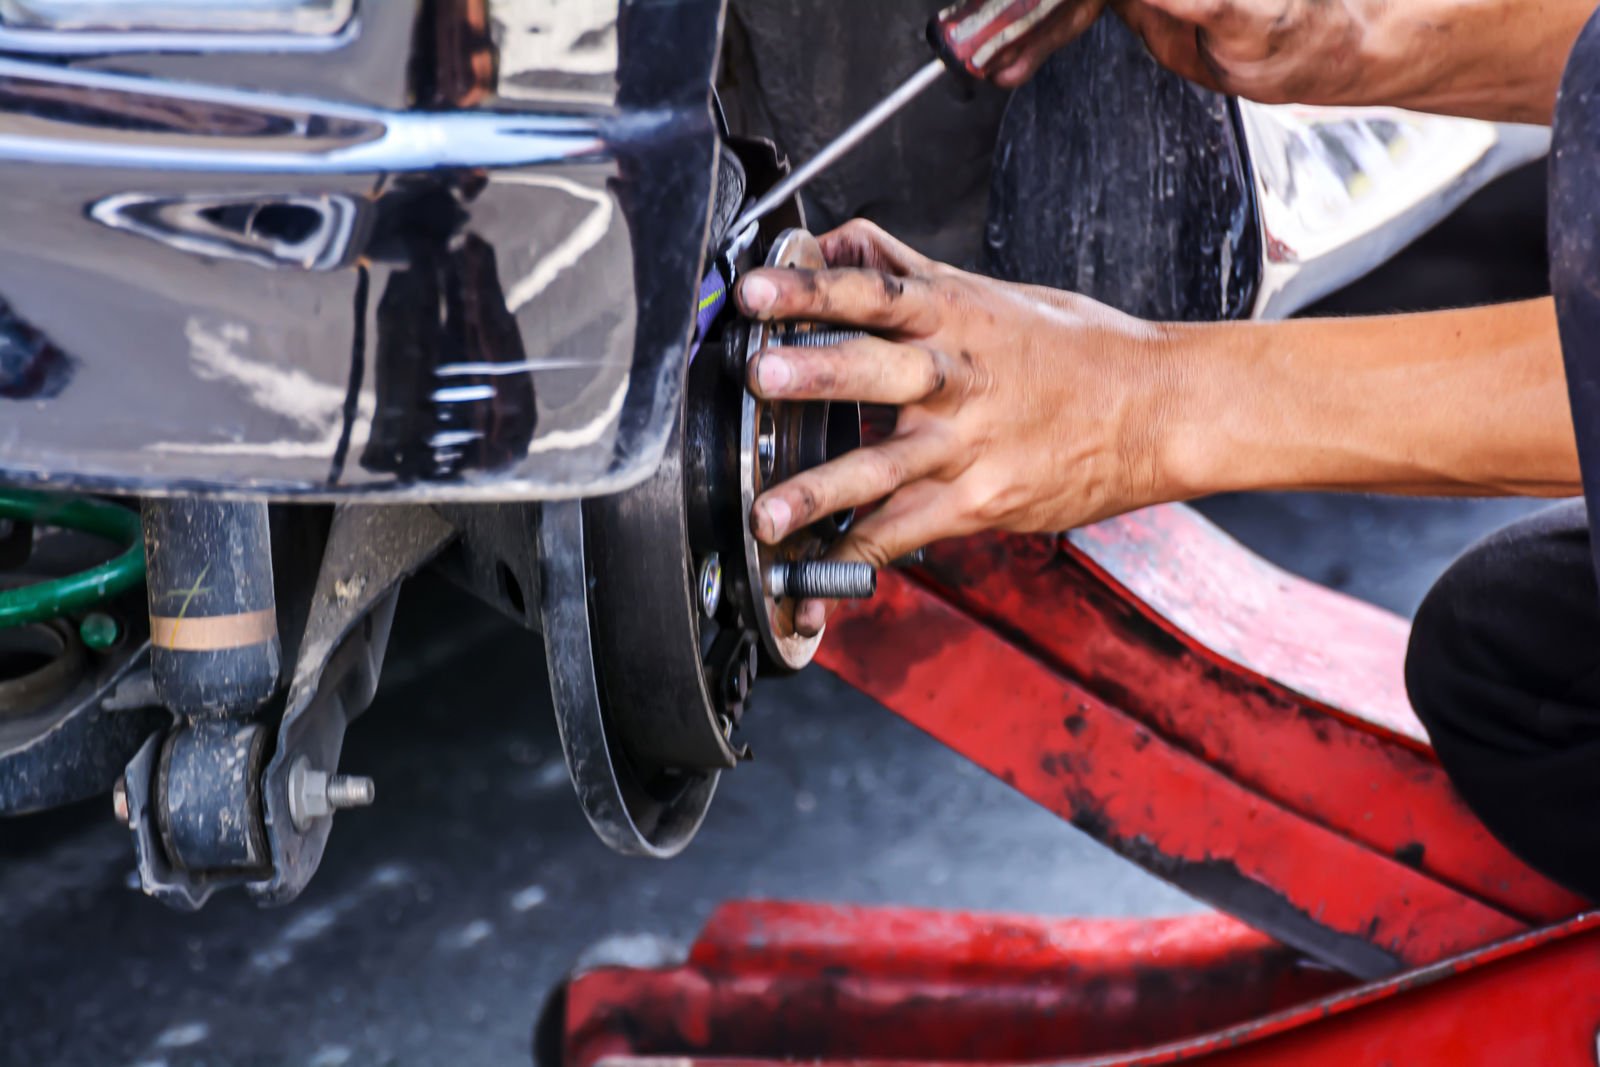 How long do car repairs take after an accident?